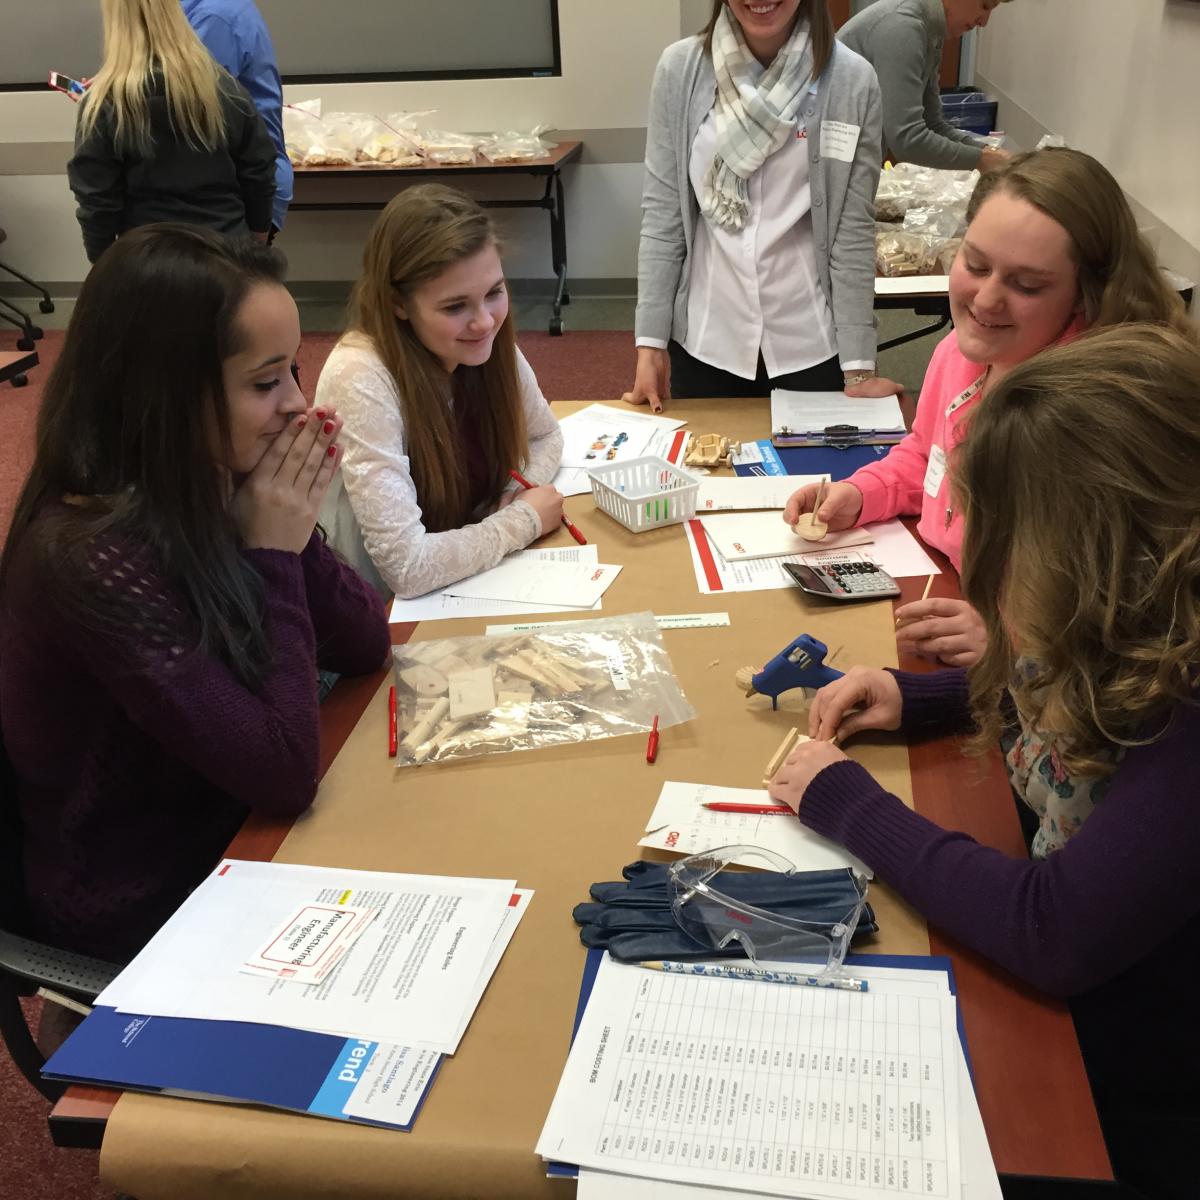 More than 160 high school girls attended Women in Engineering Day this year at Penn State Behrend.